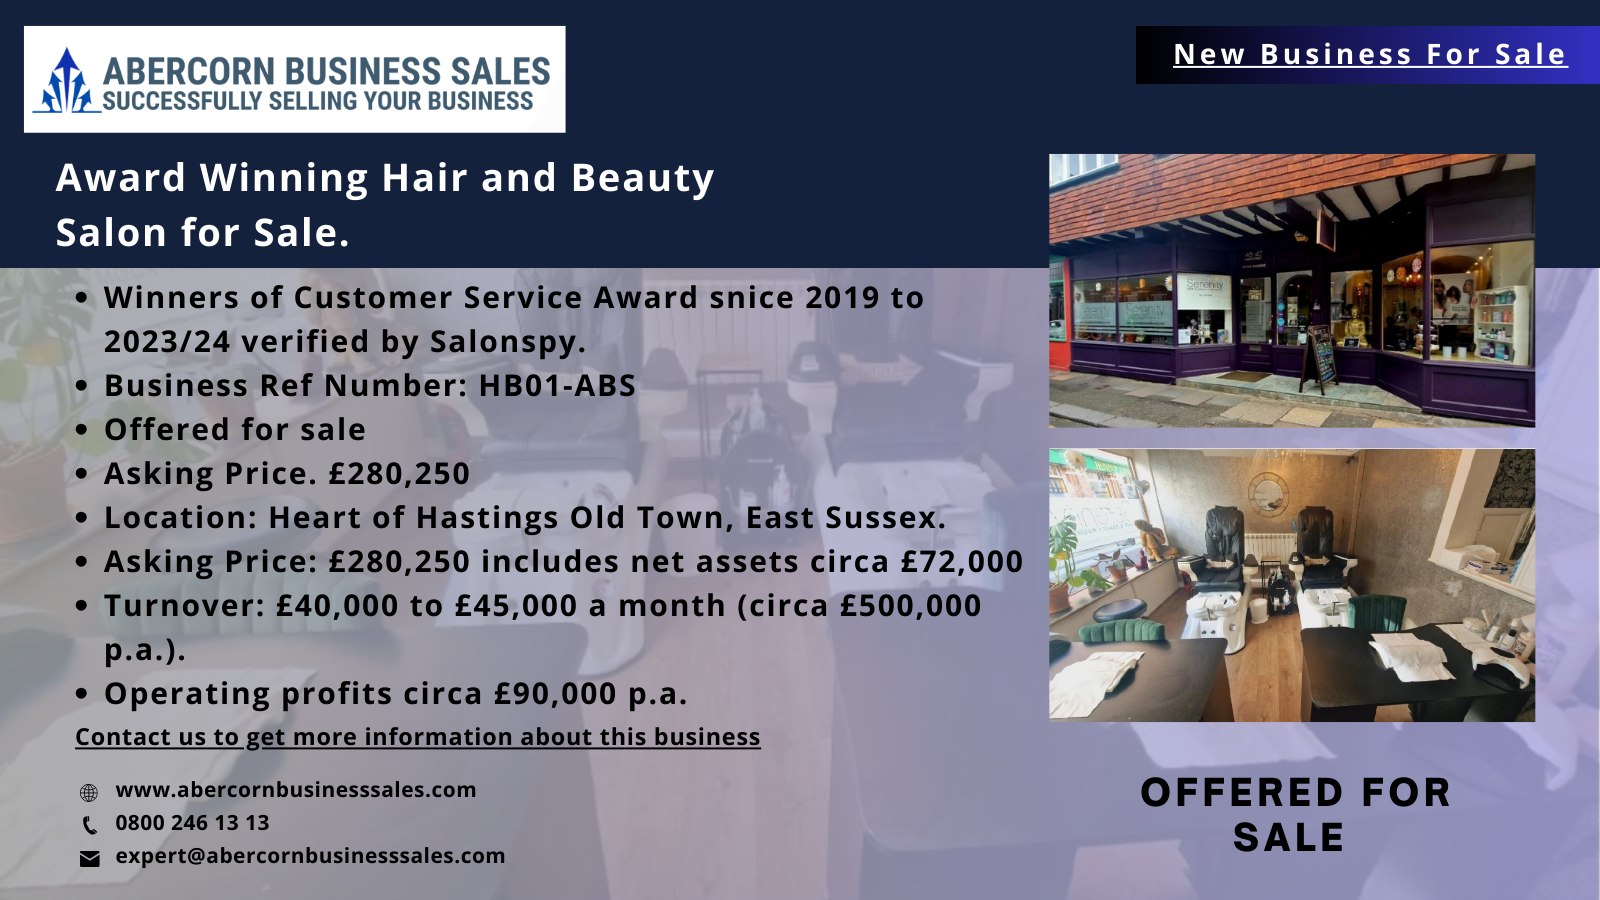 HB01-ABS - Award Winning Hair and Beauty Salon Offered for Sale